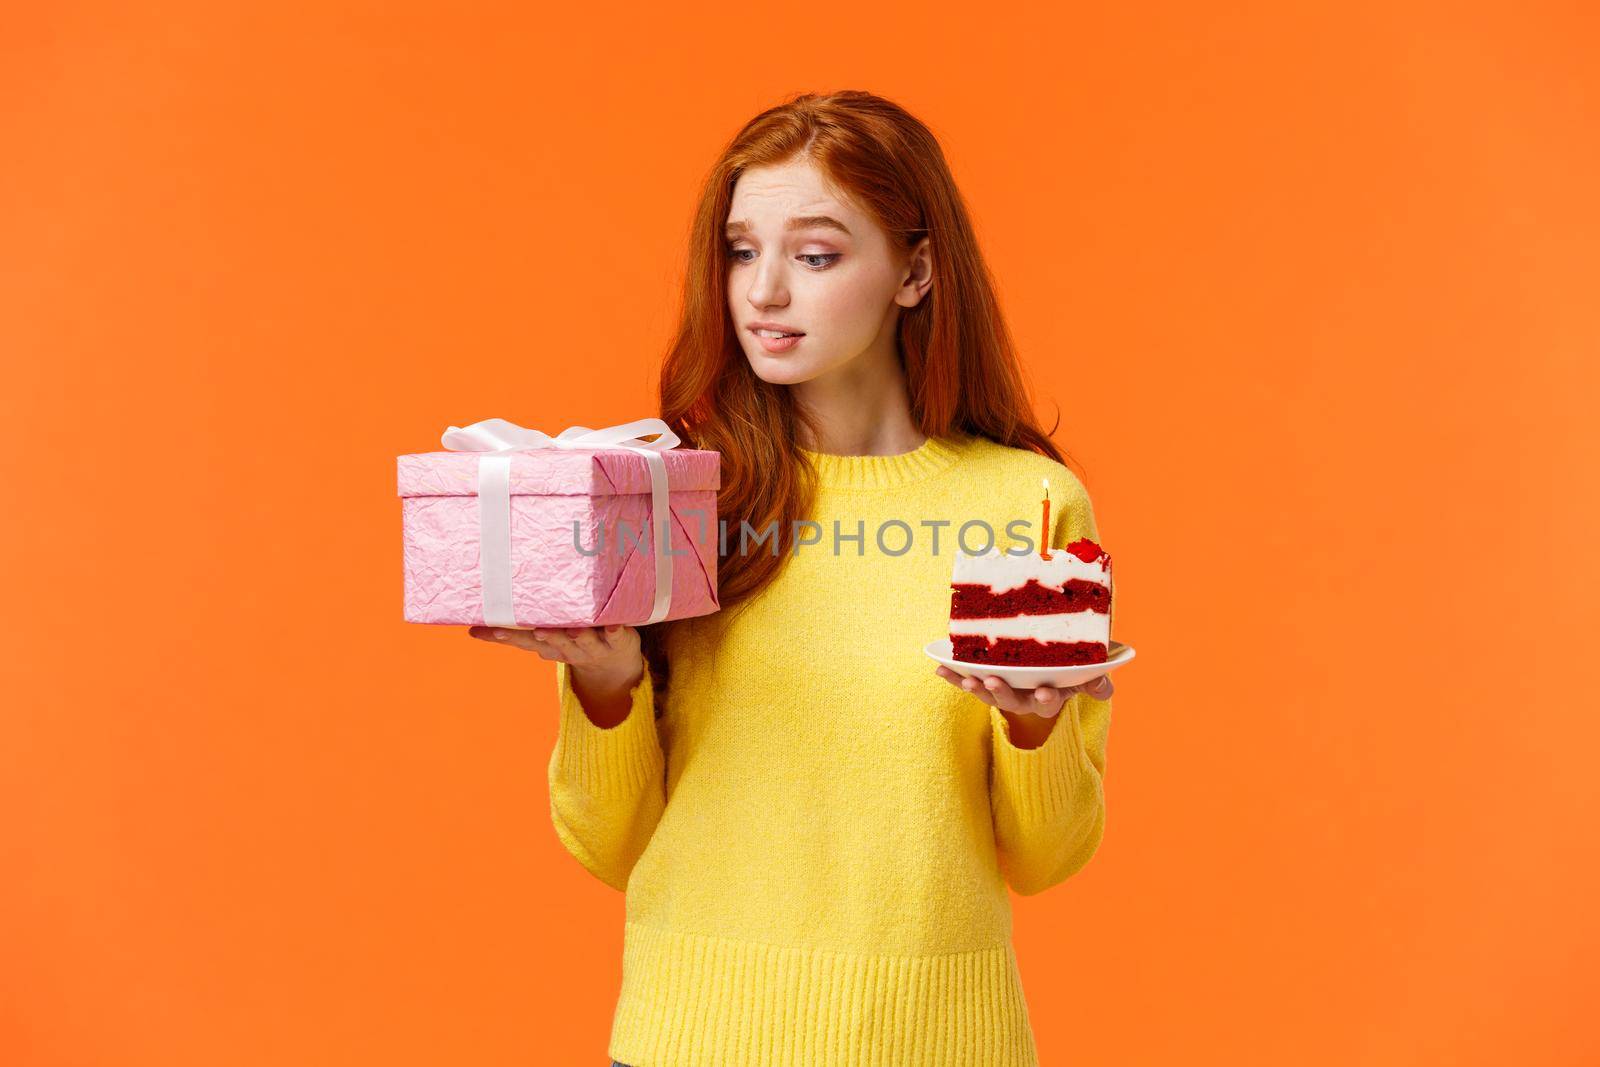 Celebration, presents and holidays concept. Cute redhead girl looking with temptation, desire at gift box, holding wrapped present, piece of delicious b-day cake, birthday girl want unwrap surprise.